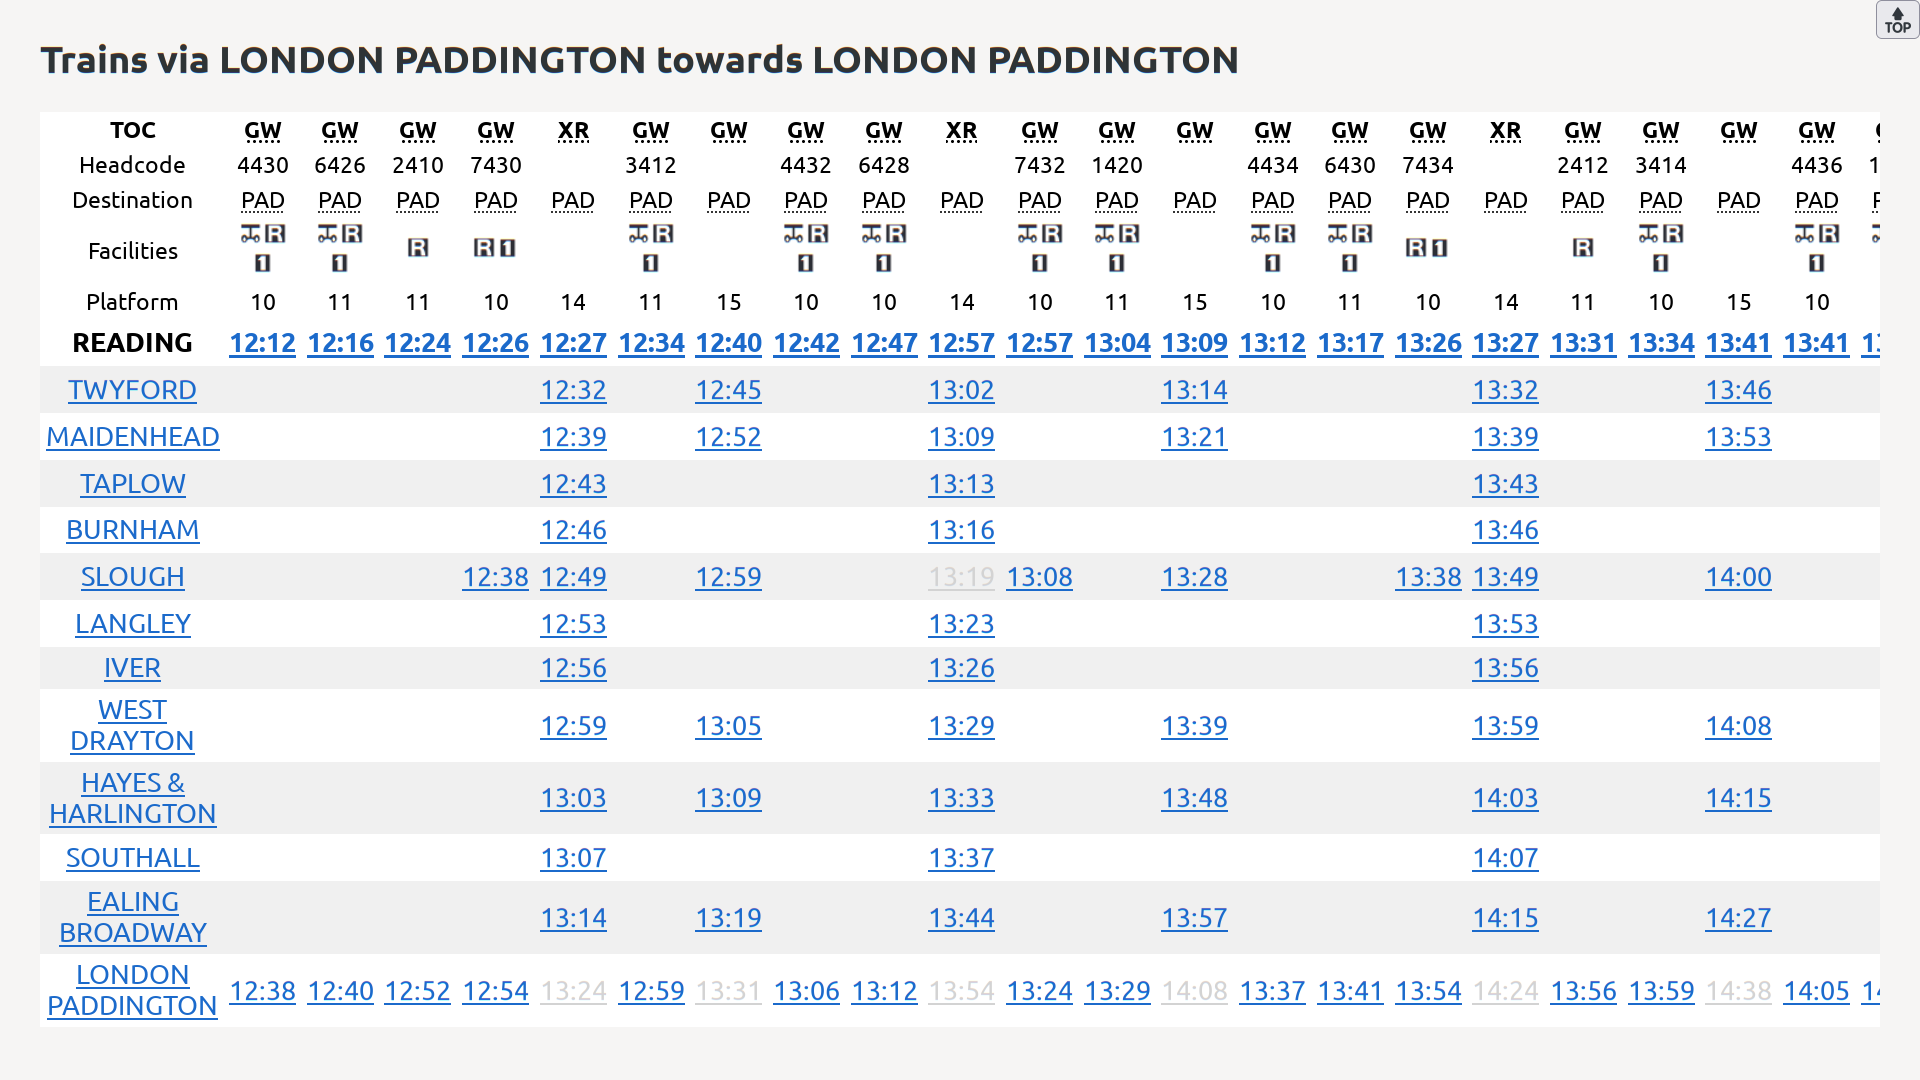 Interface showing a timetable from Reading to Paddington